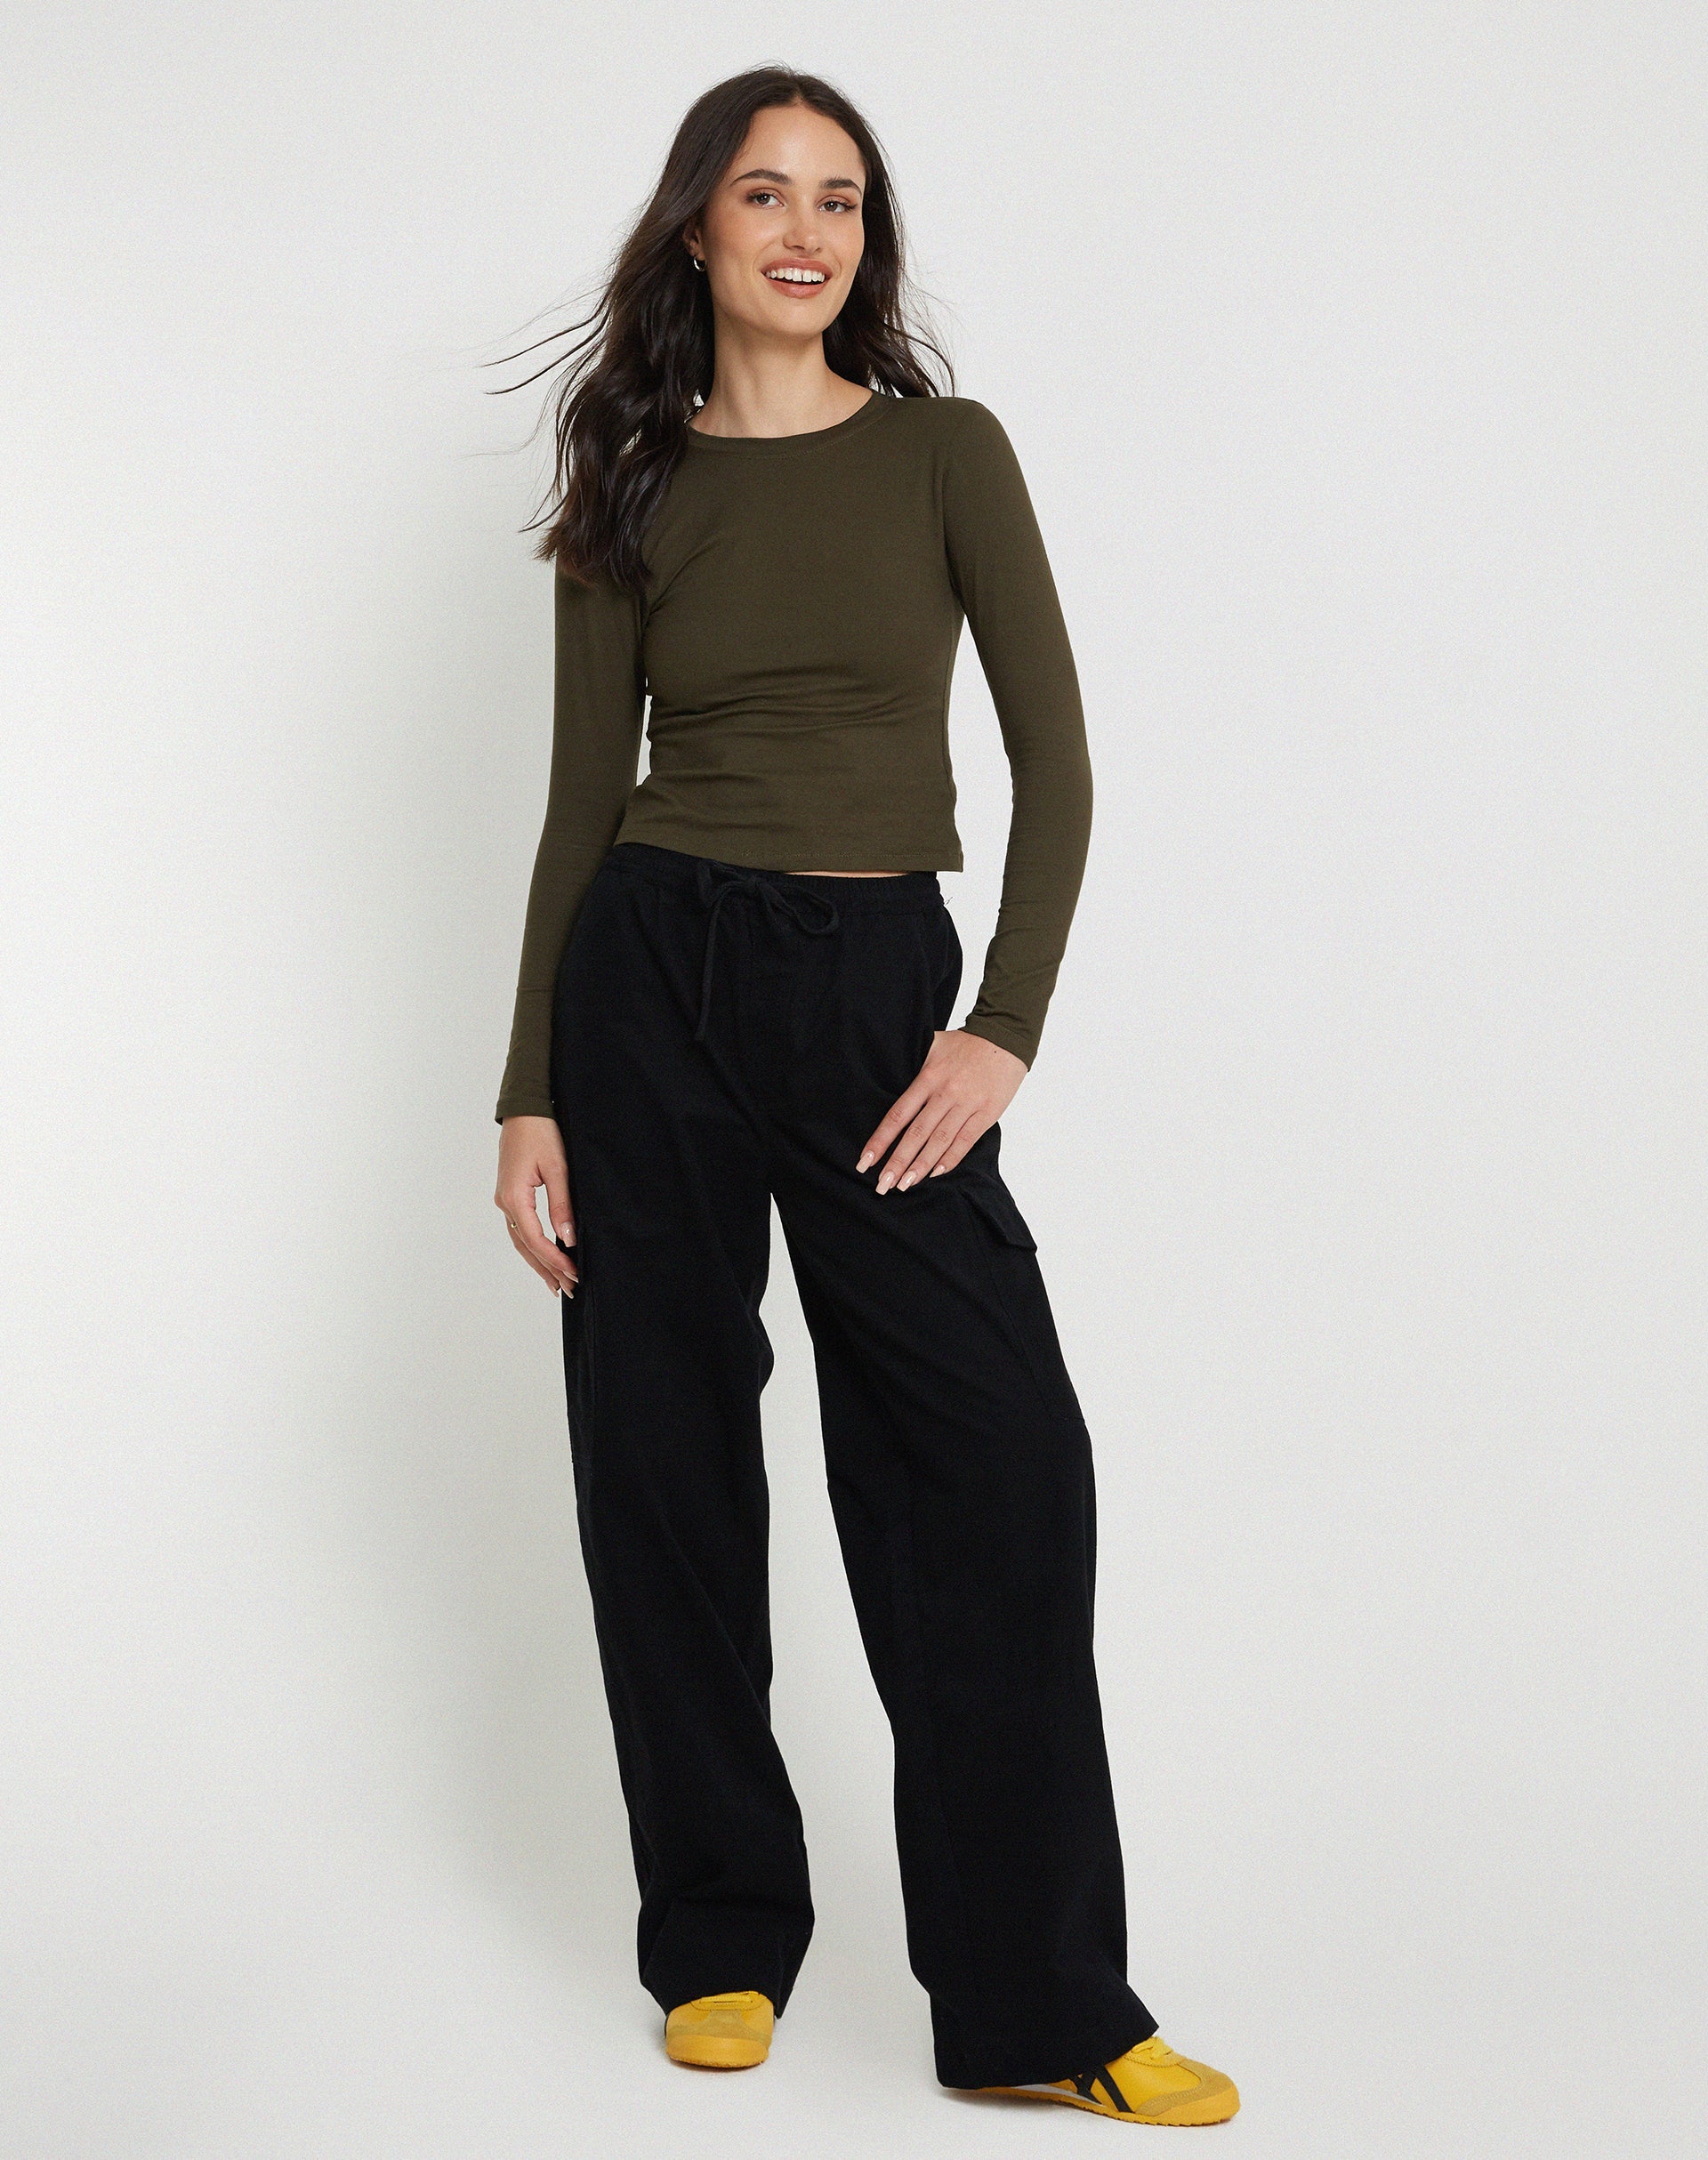 Image of Suratmi Long Sleeve Top in Olive